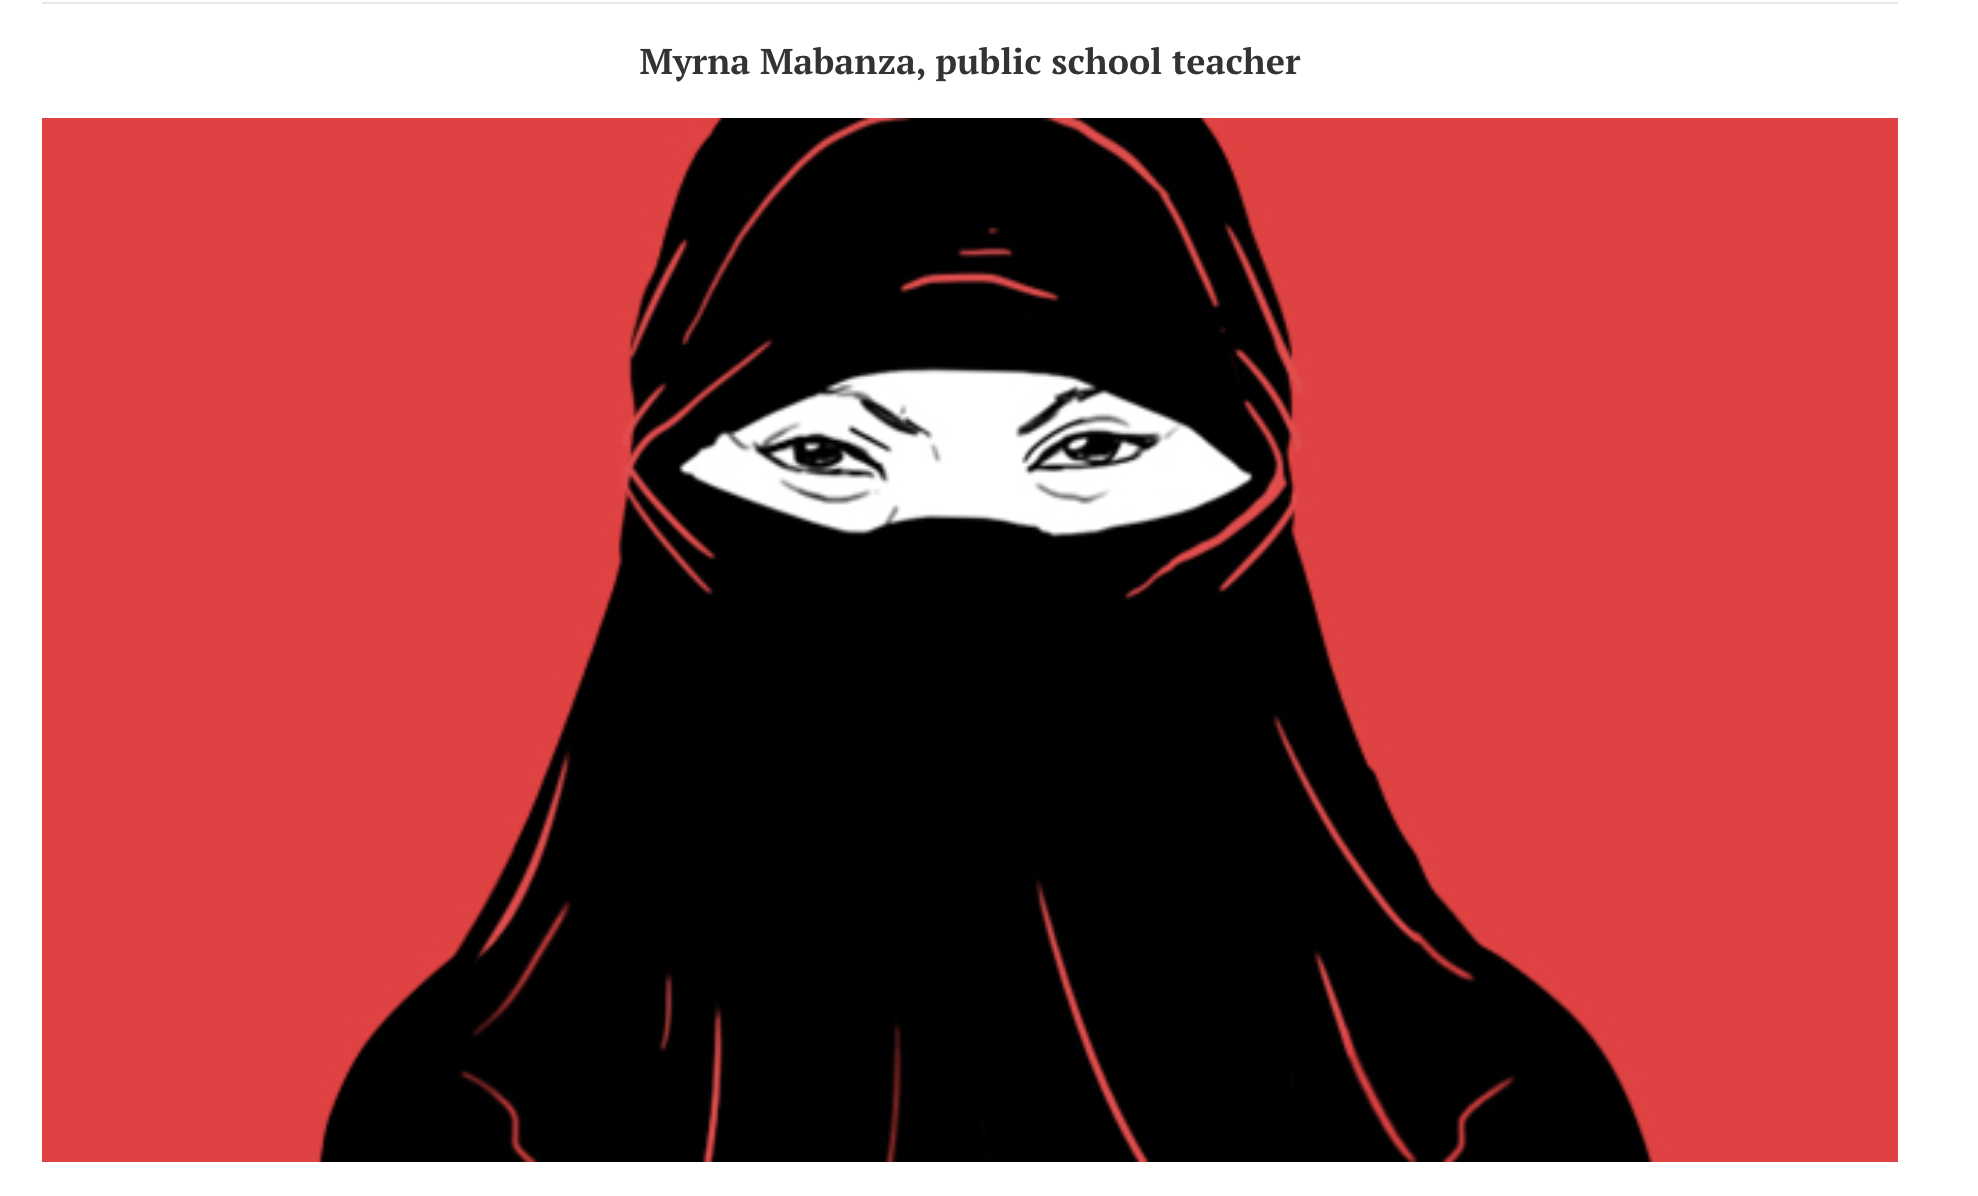 In 2018, the US Department of the Treasury’s Office of Foreign Assets Control listed public school teacher Myrna Mabanza as a Specially Designated Global Terrorist for her involvement in the transfer of an estimated $107,000 to members of ISIS’s network in the Philippines in 2016. Image courtesy of Rappler.